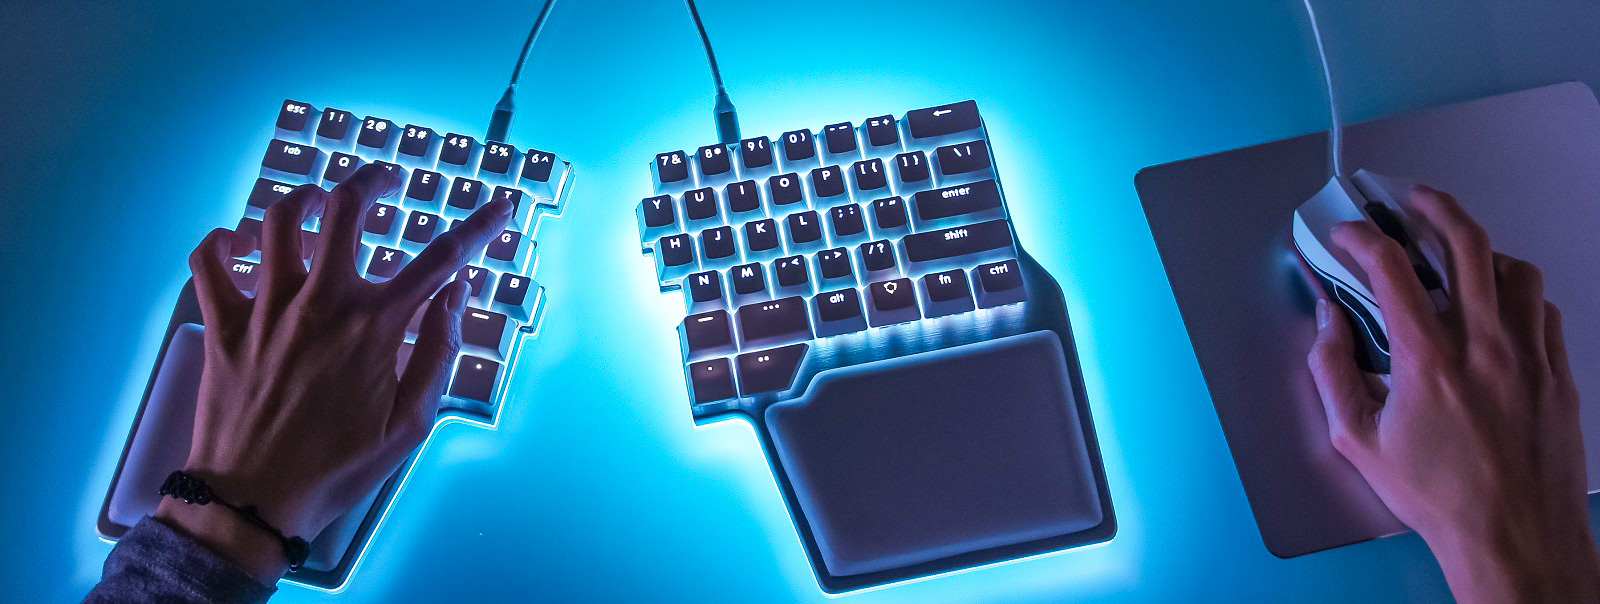 Dygma Raise is the new ergonomic keyboard for gamers